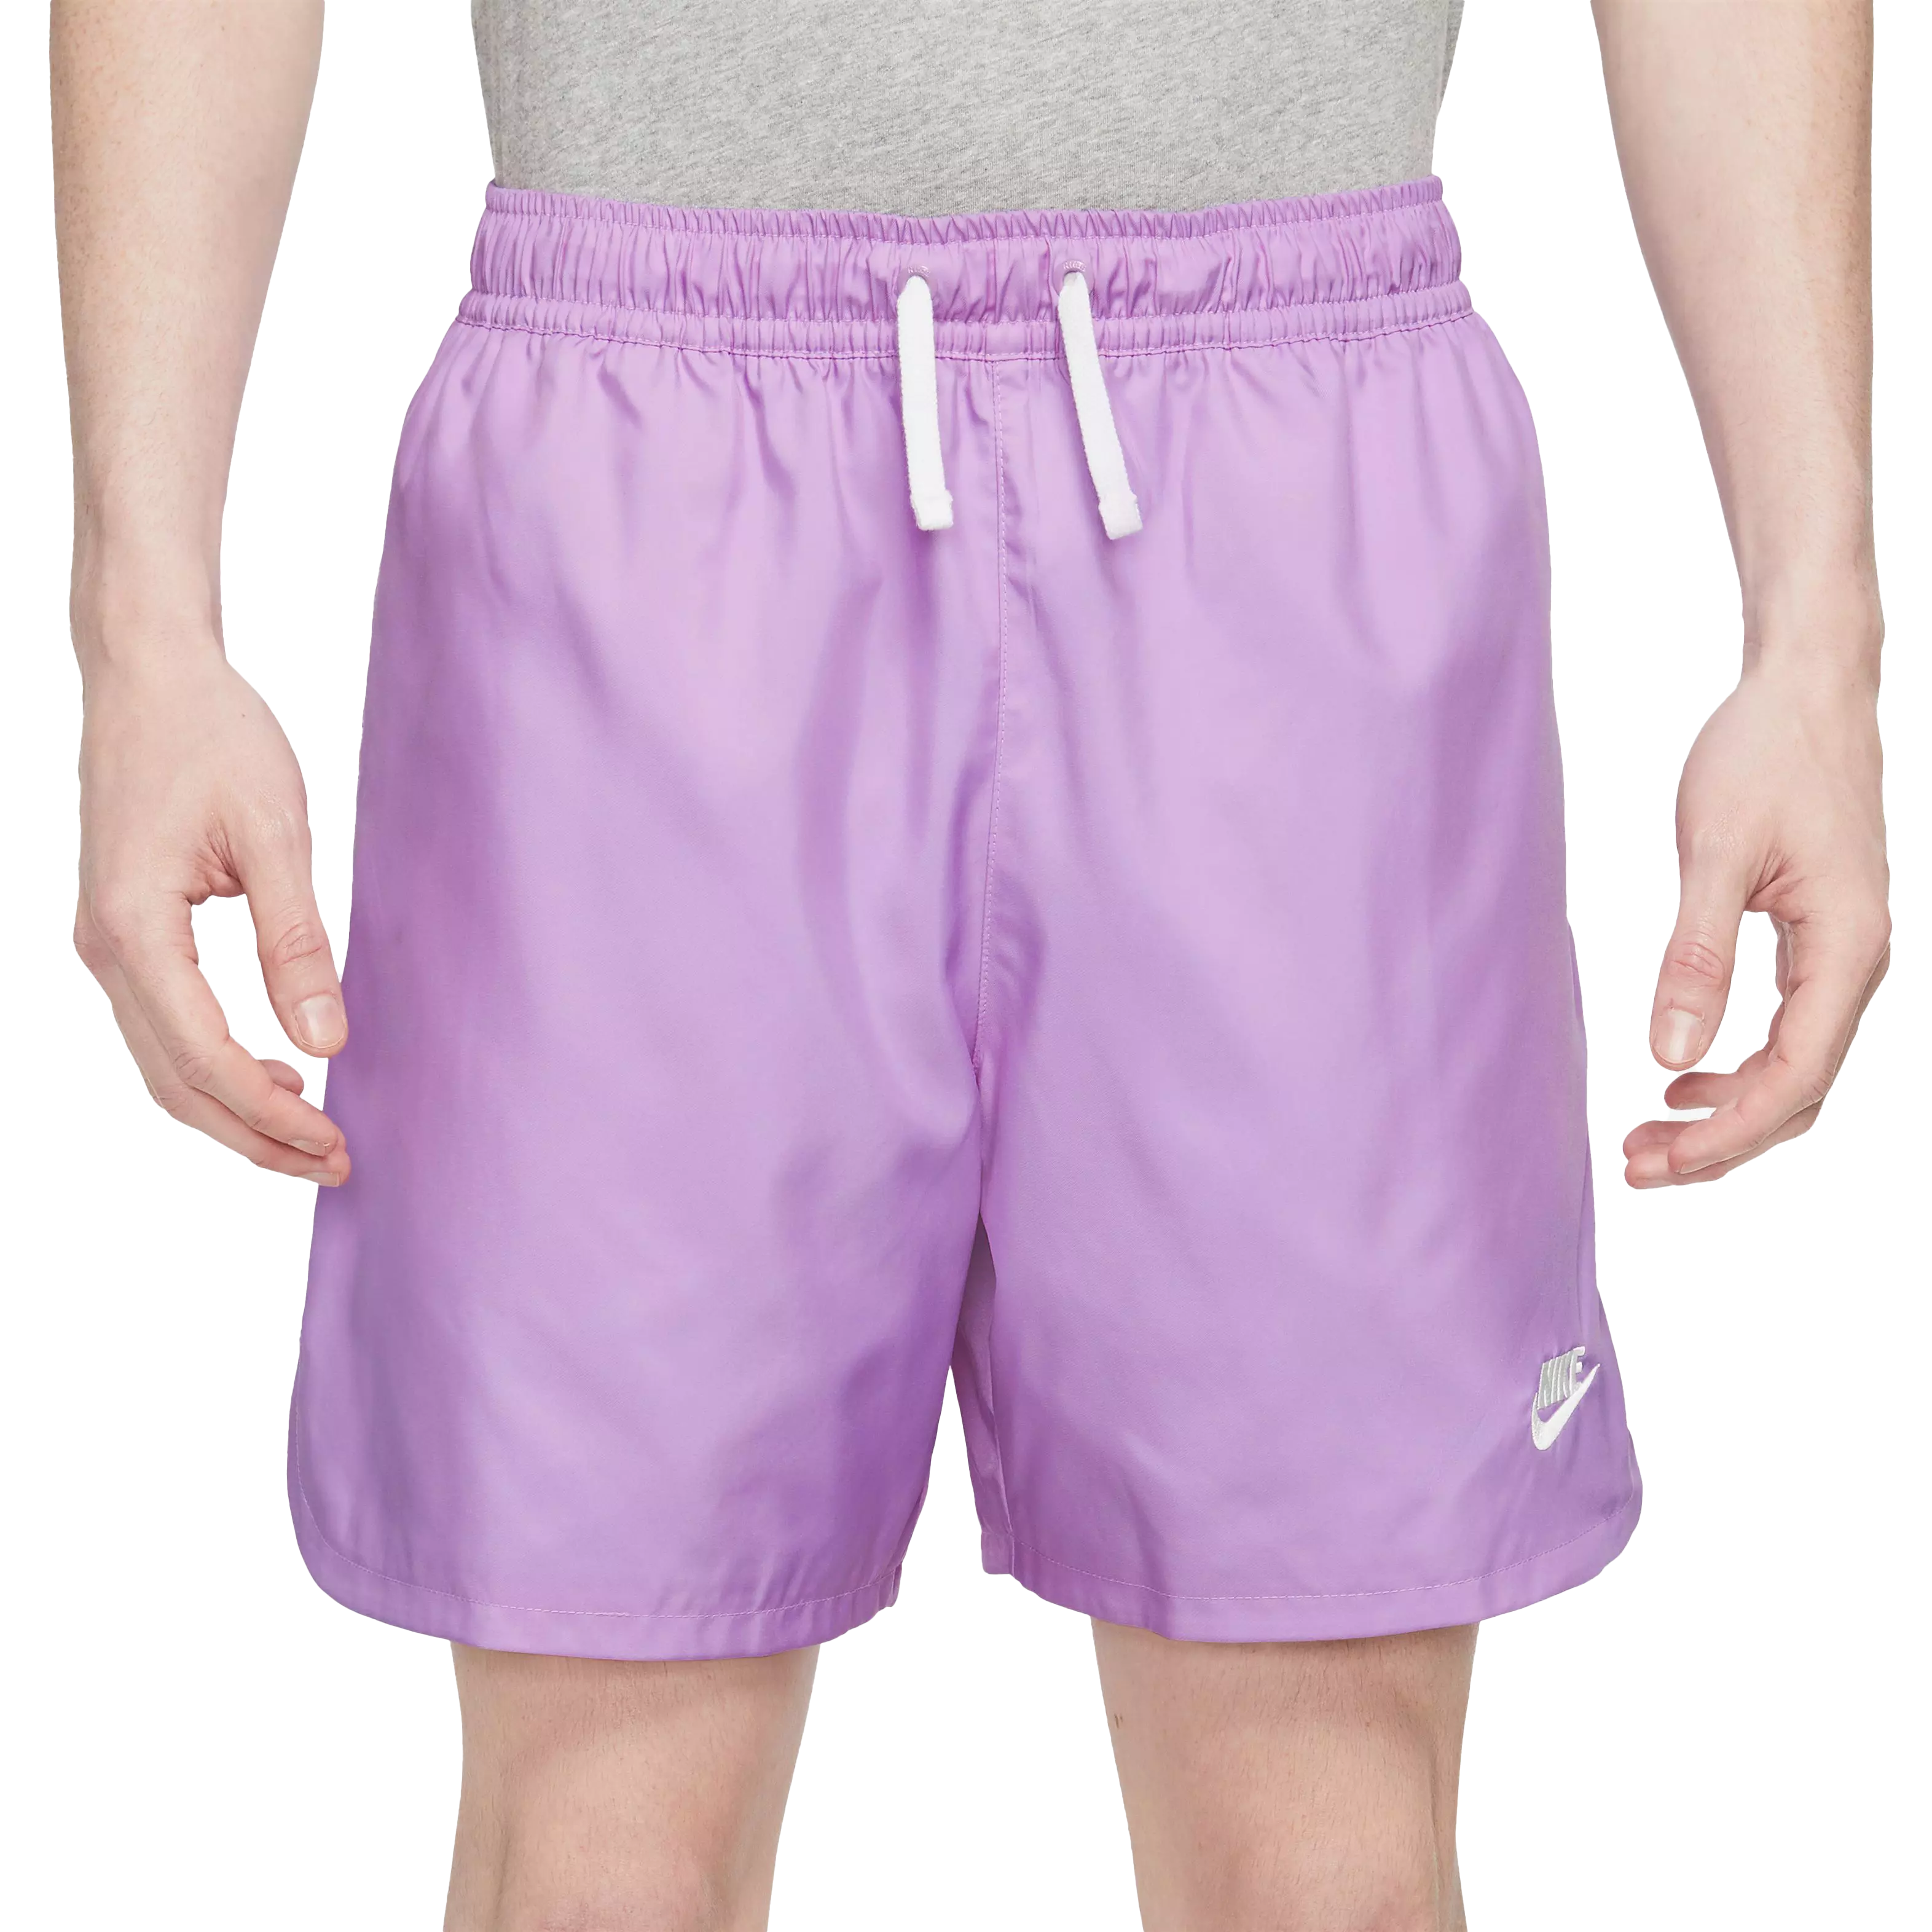 Simple Knit Sport Shorts with a Lining! {tutorial}